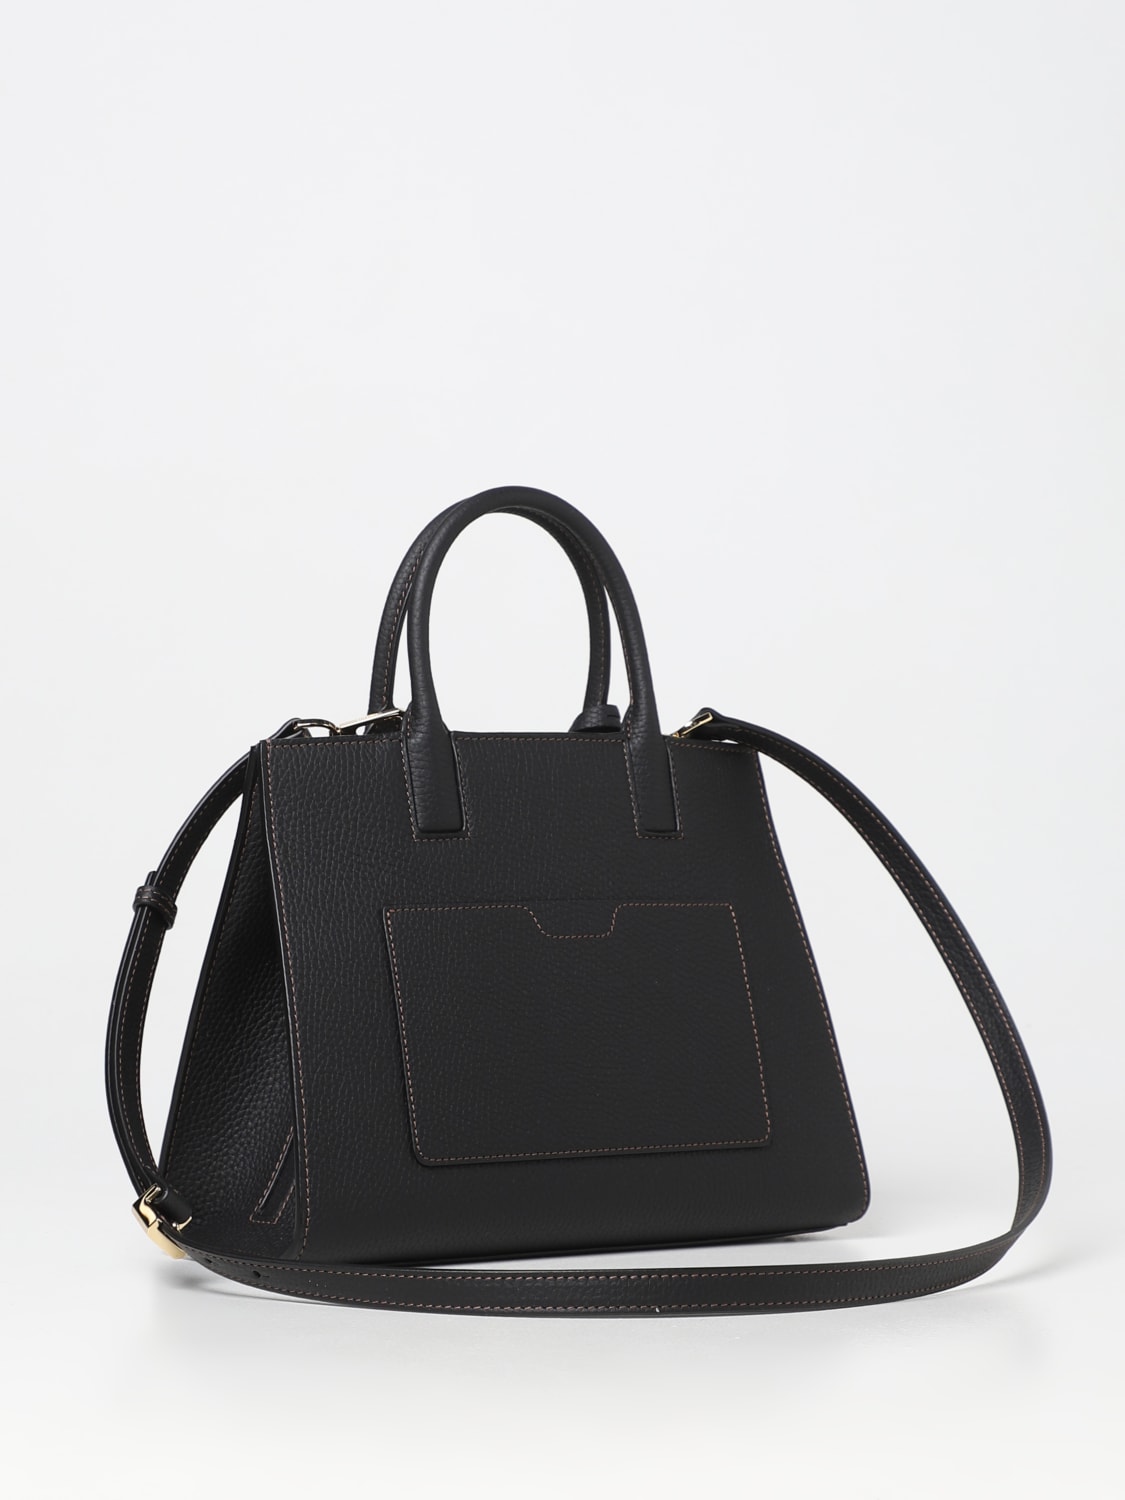 Burberry Frances Small Leather Top-handle Bag in Black